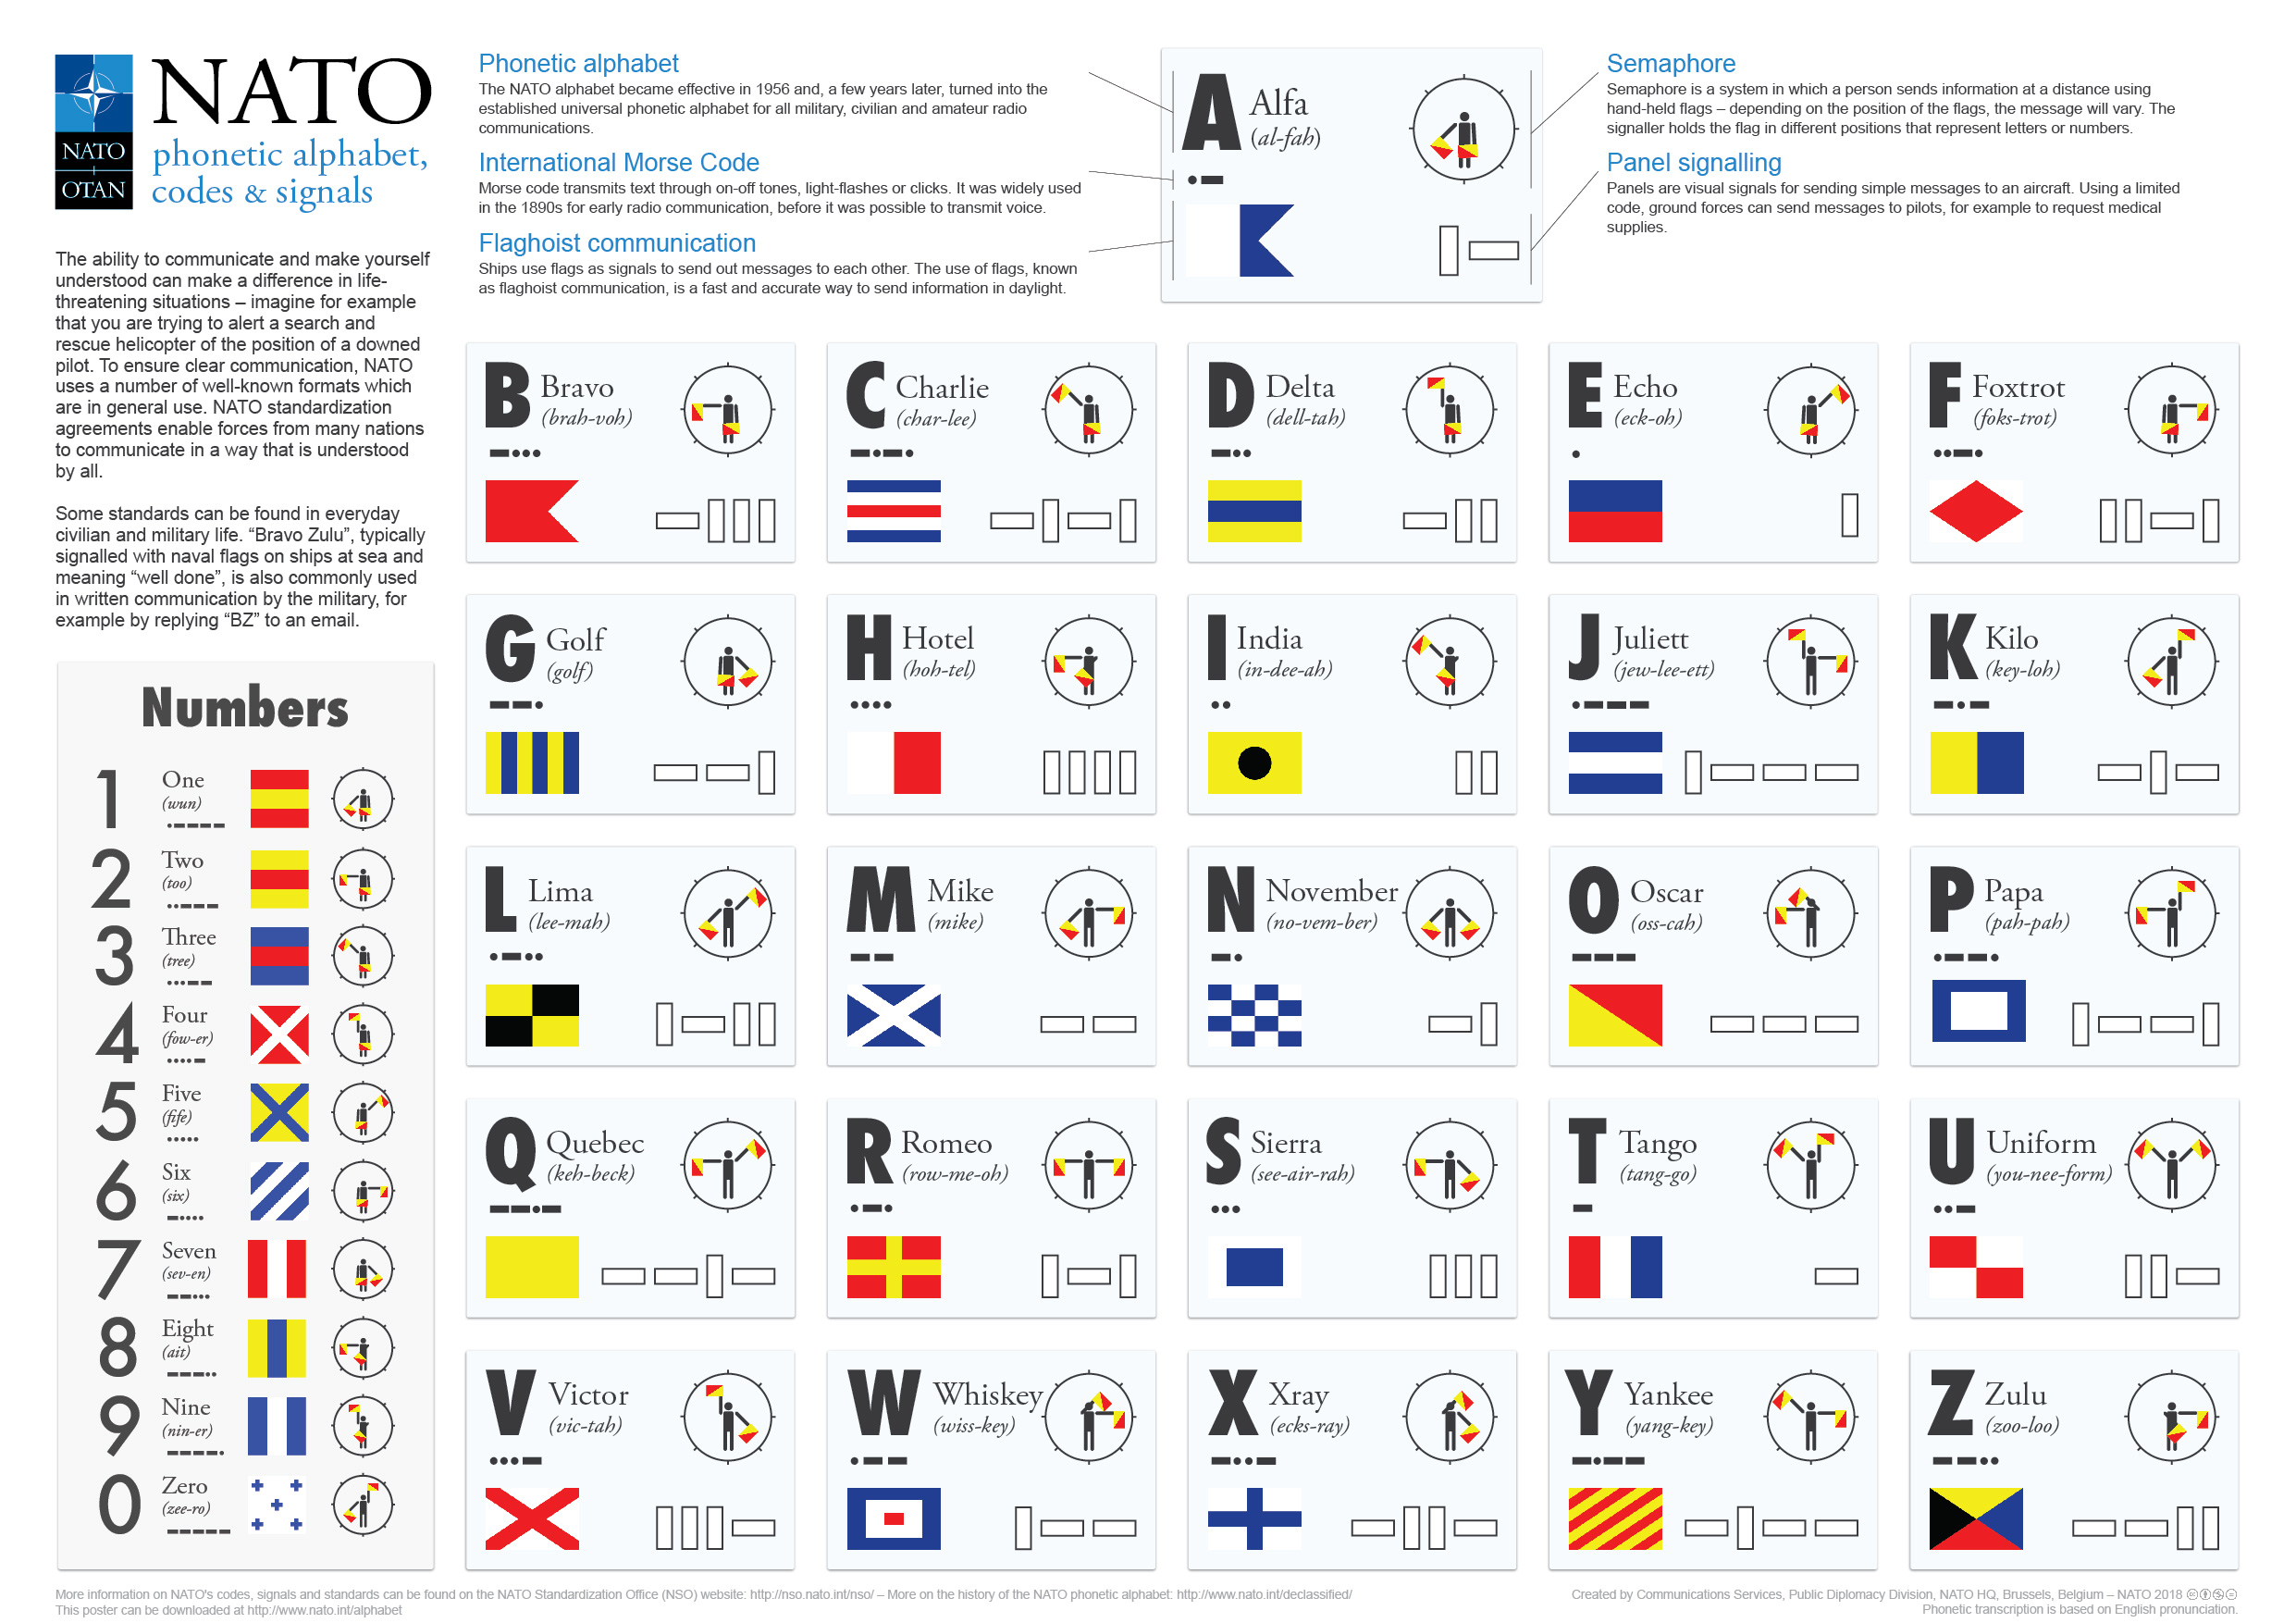 Do you know what NATO phonetic alphabet is?